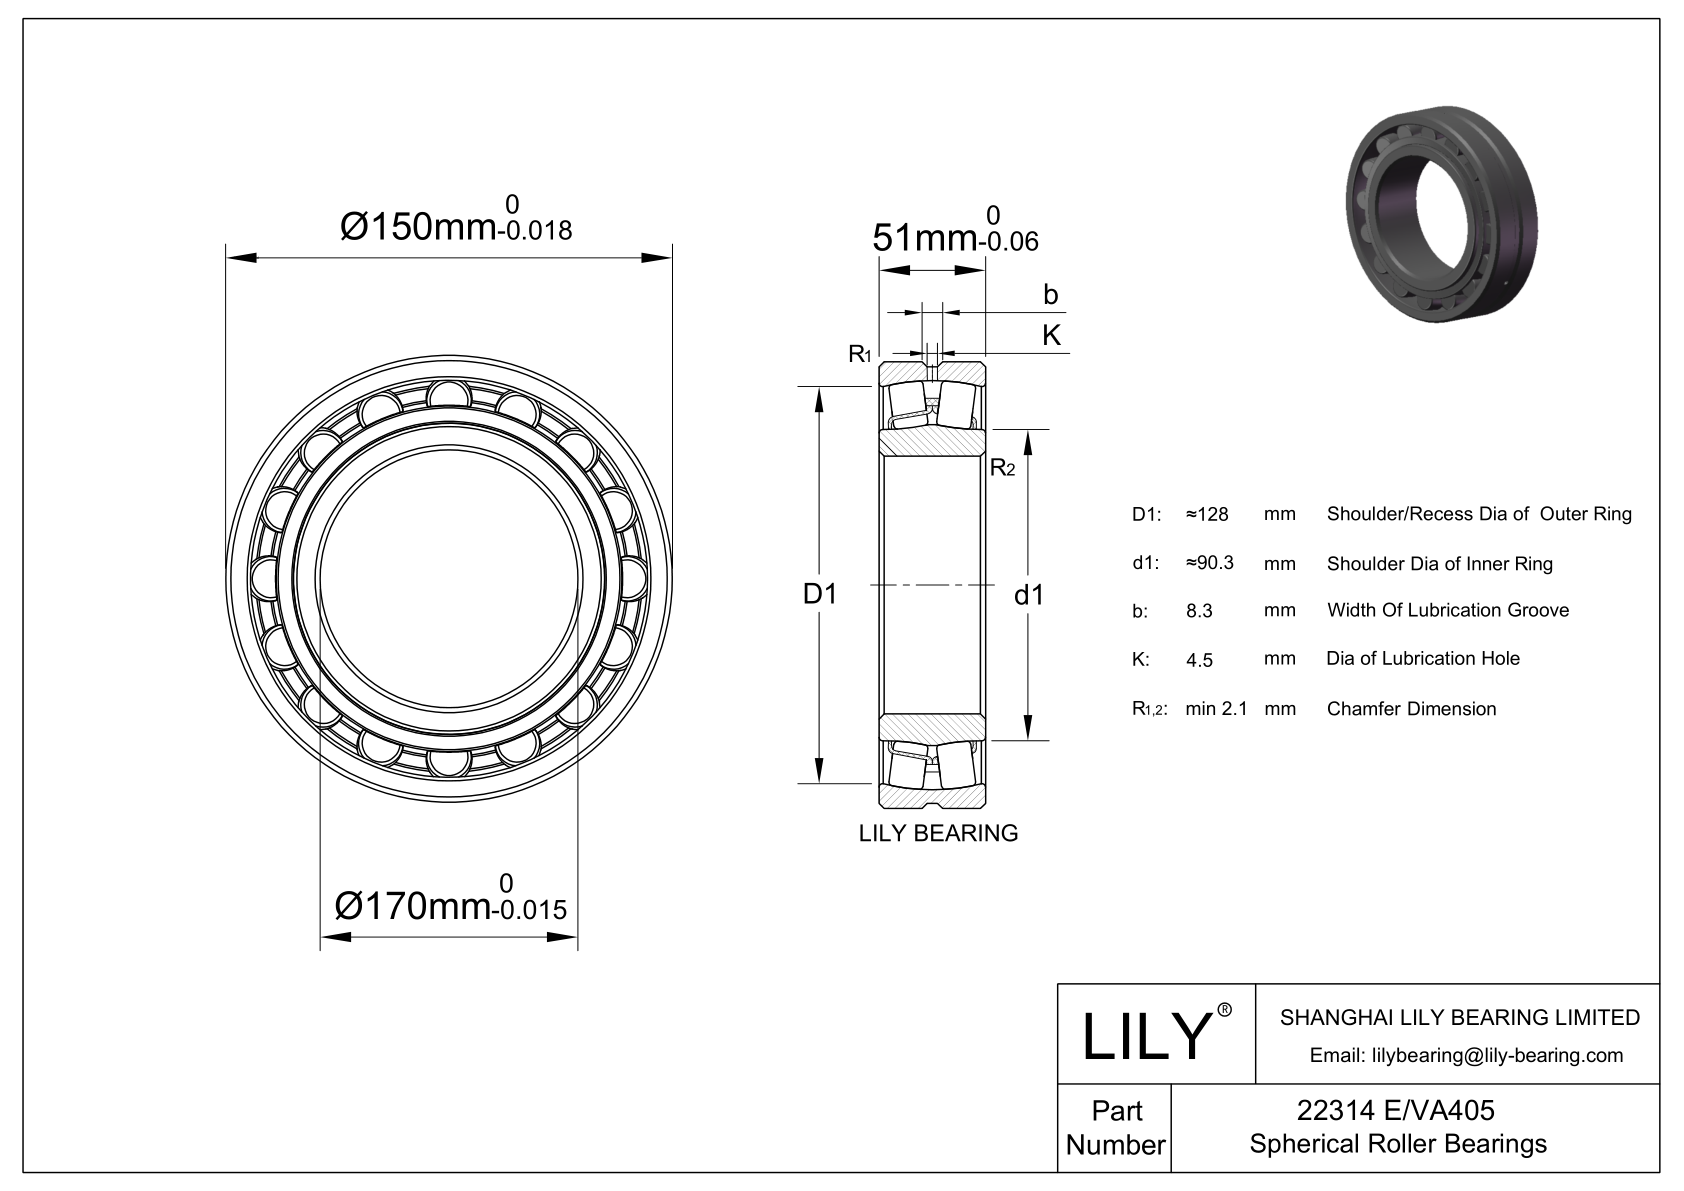 22314 E/VA405 Double Row Spherical Roller Bearing cad drawing